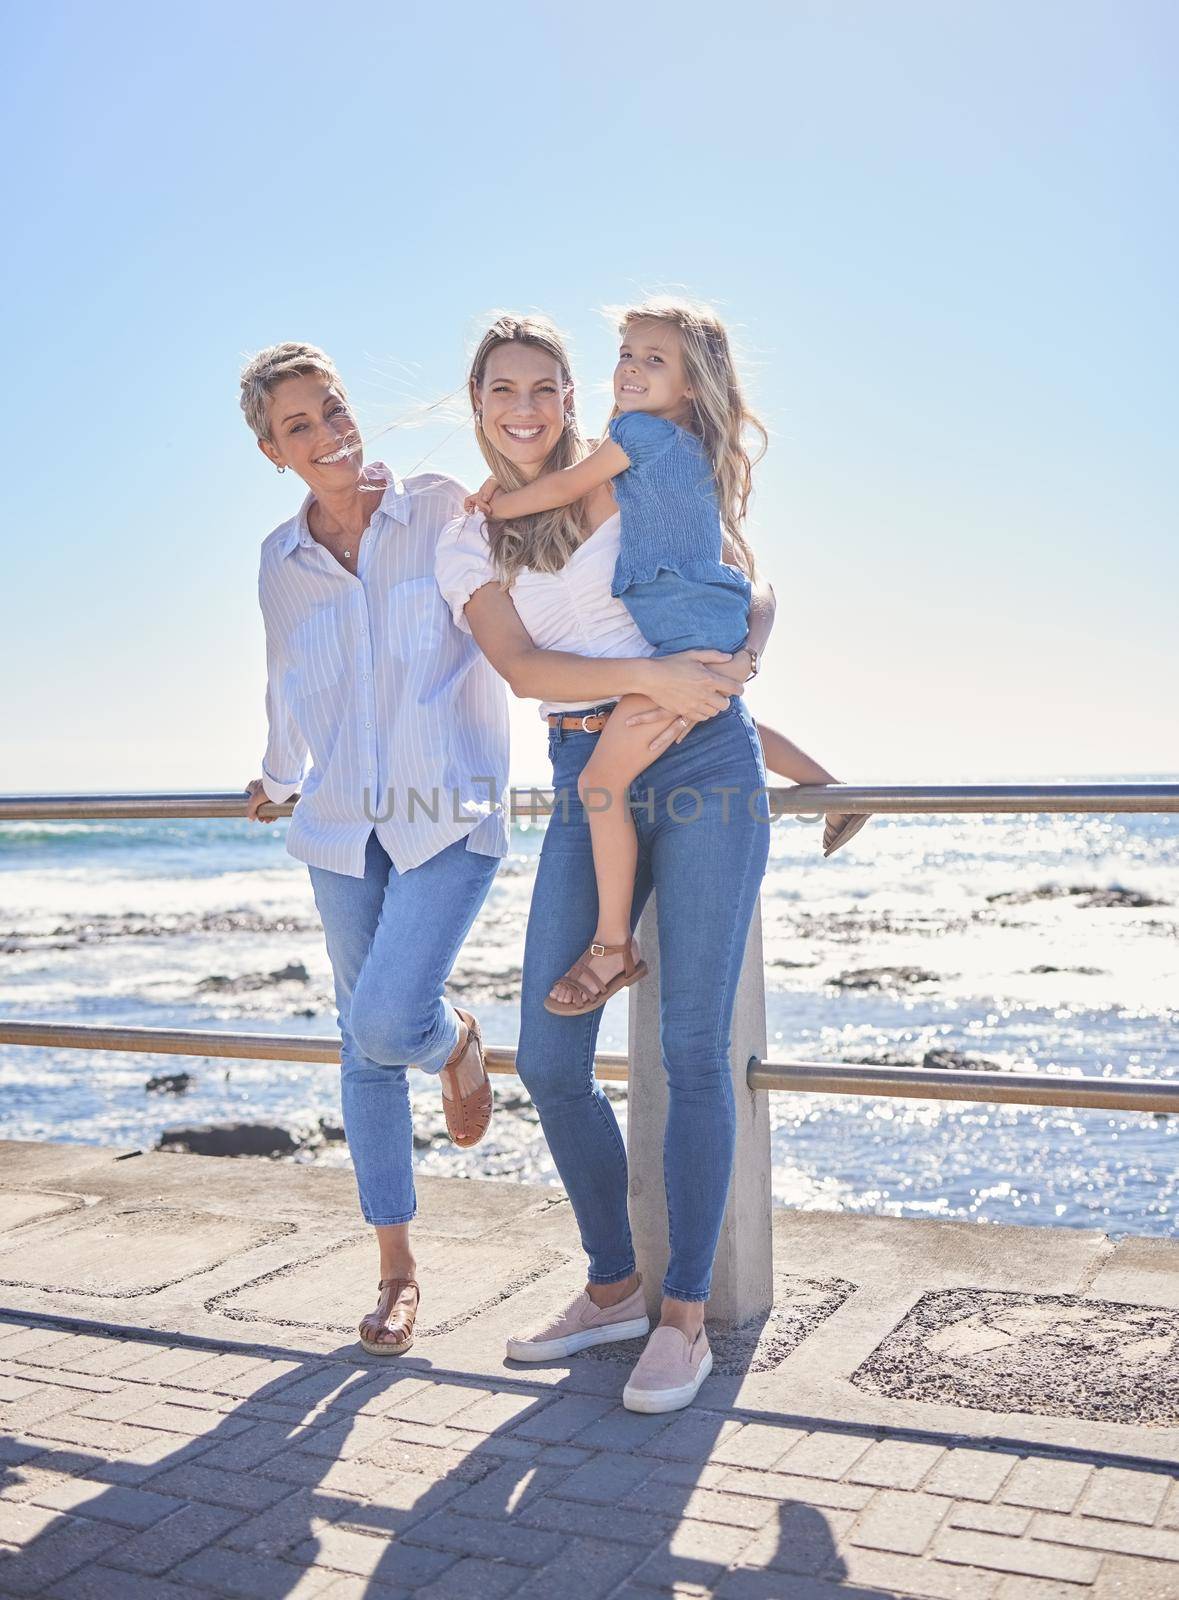 Full length of female family members posing together at the beach on a sunny day. Grandmother, mother and granddaughter standing together on seaside promenade. Multi-generation family of women and little girl spending time together.